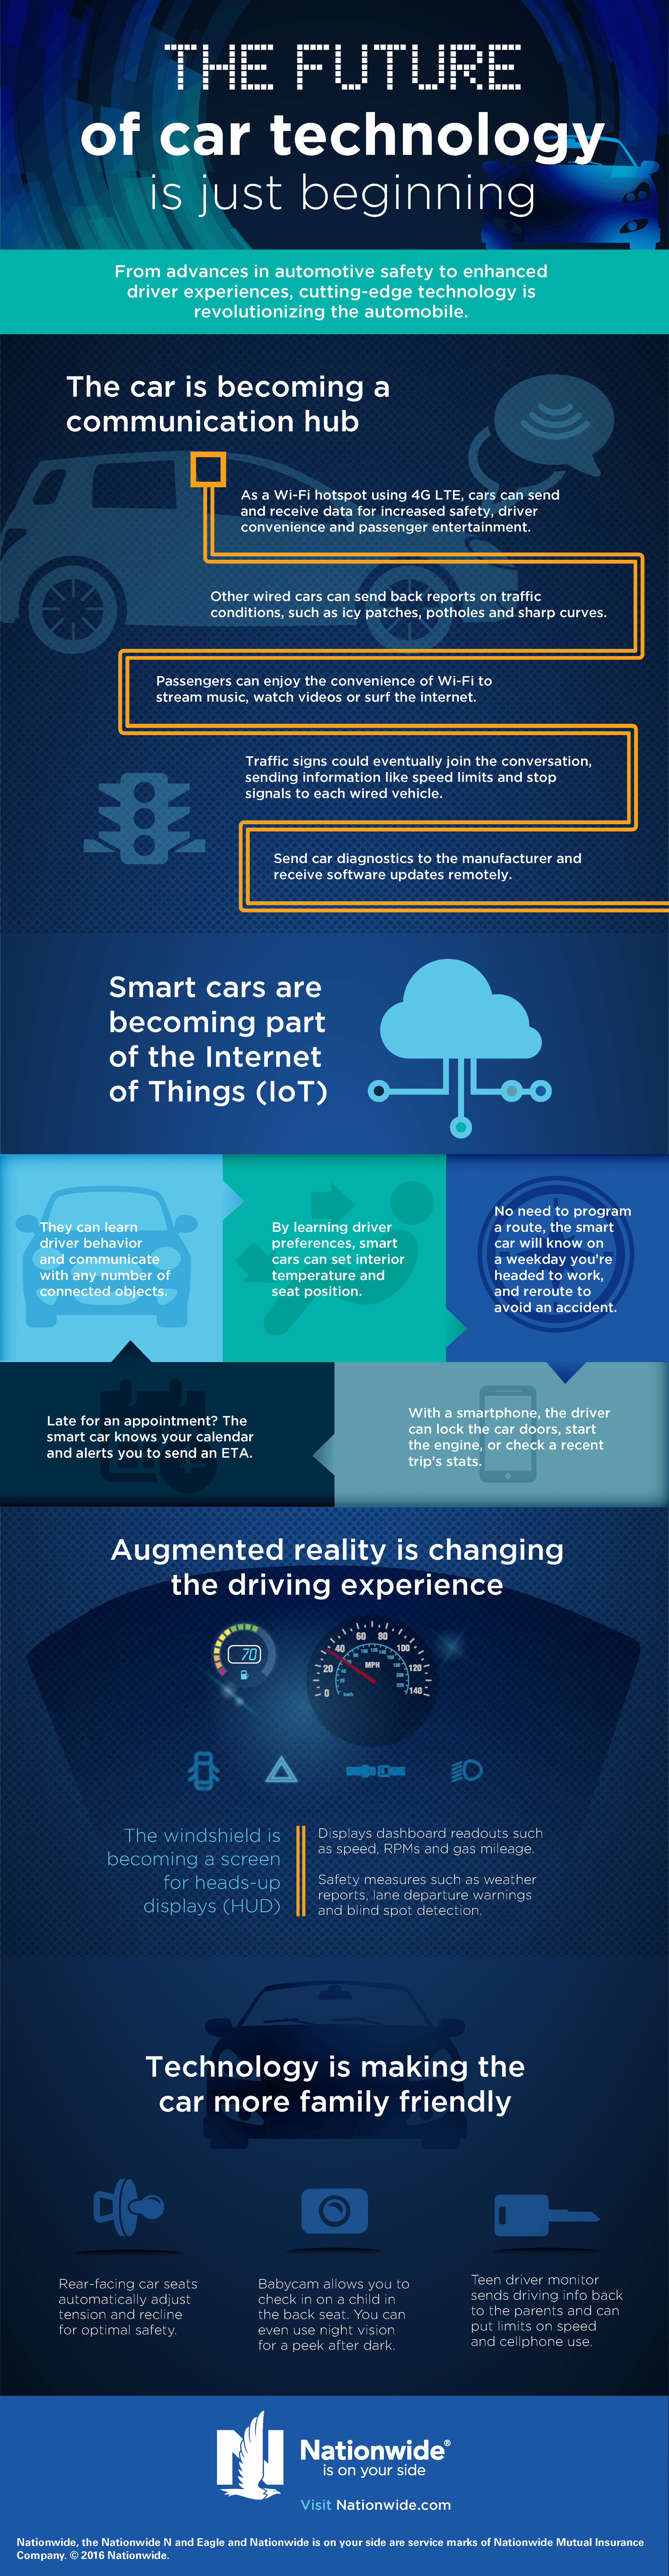 New Technology in the Automotive Industry [Infographic]